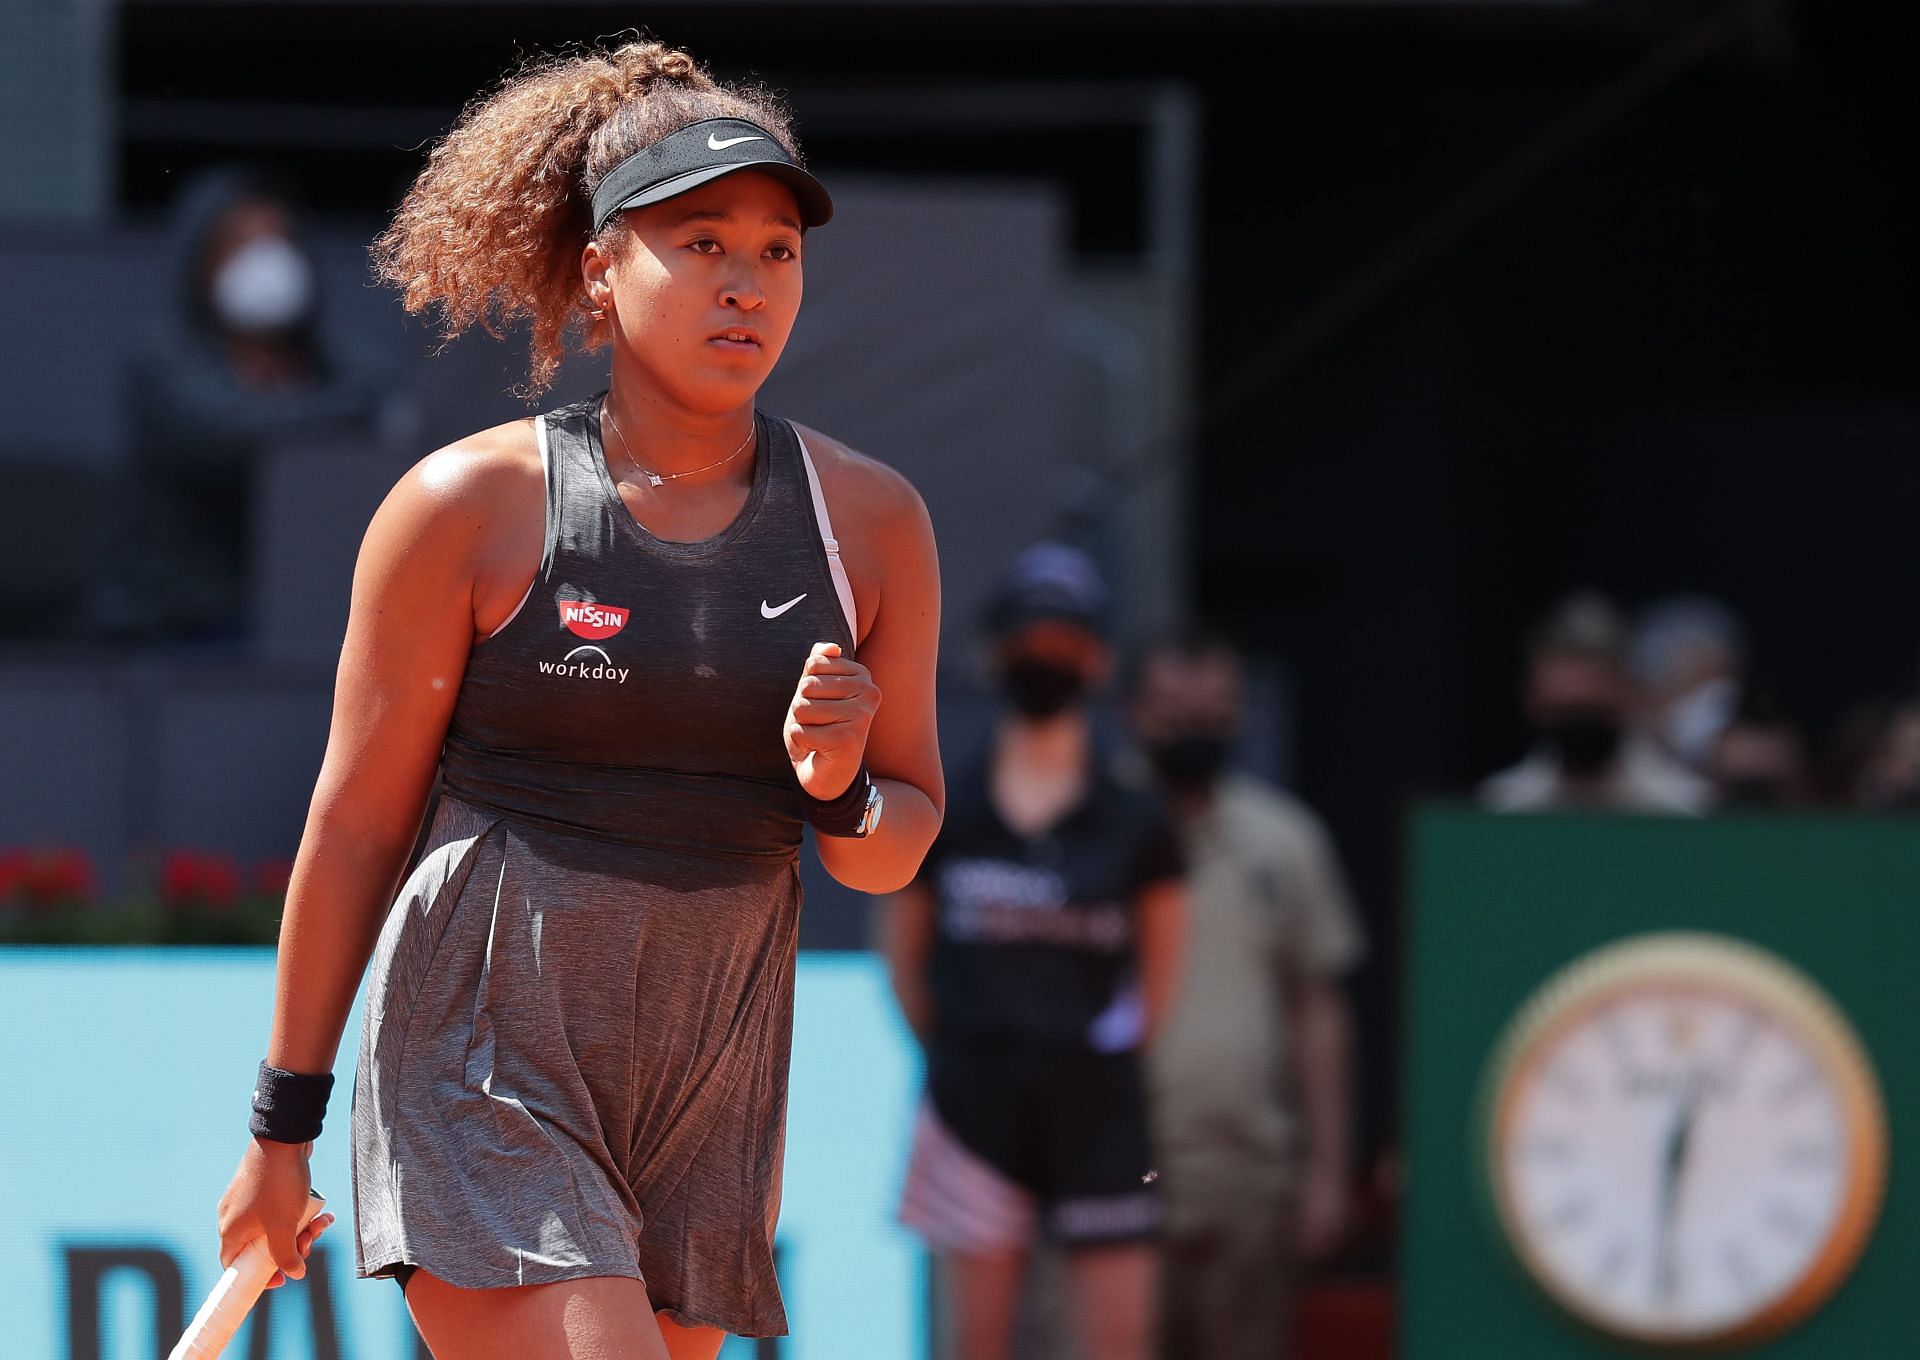 Naomi Osaka will be seen in action next at the Madrid Open